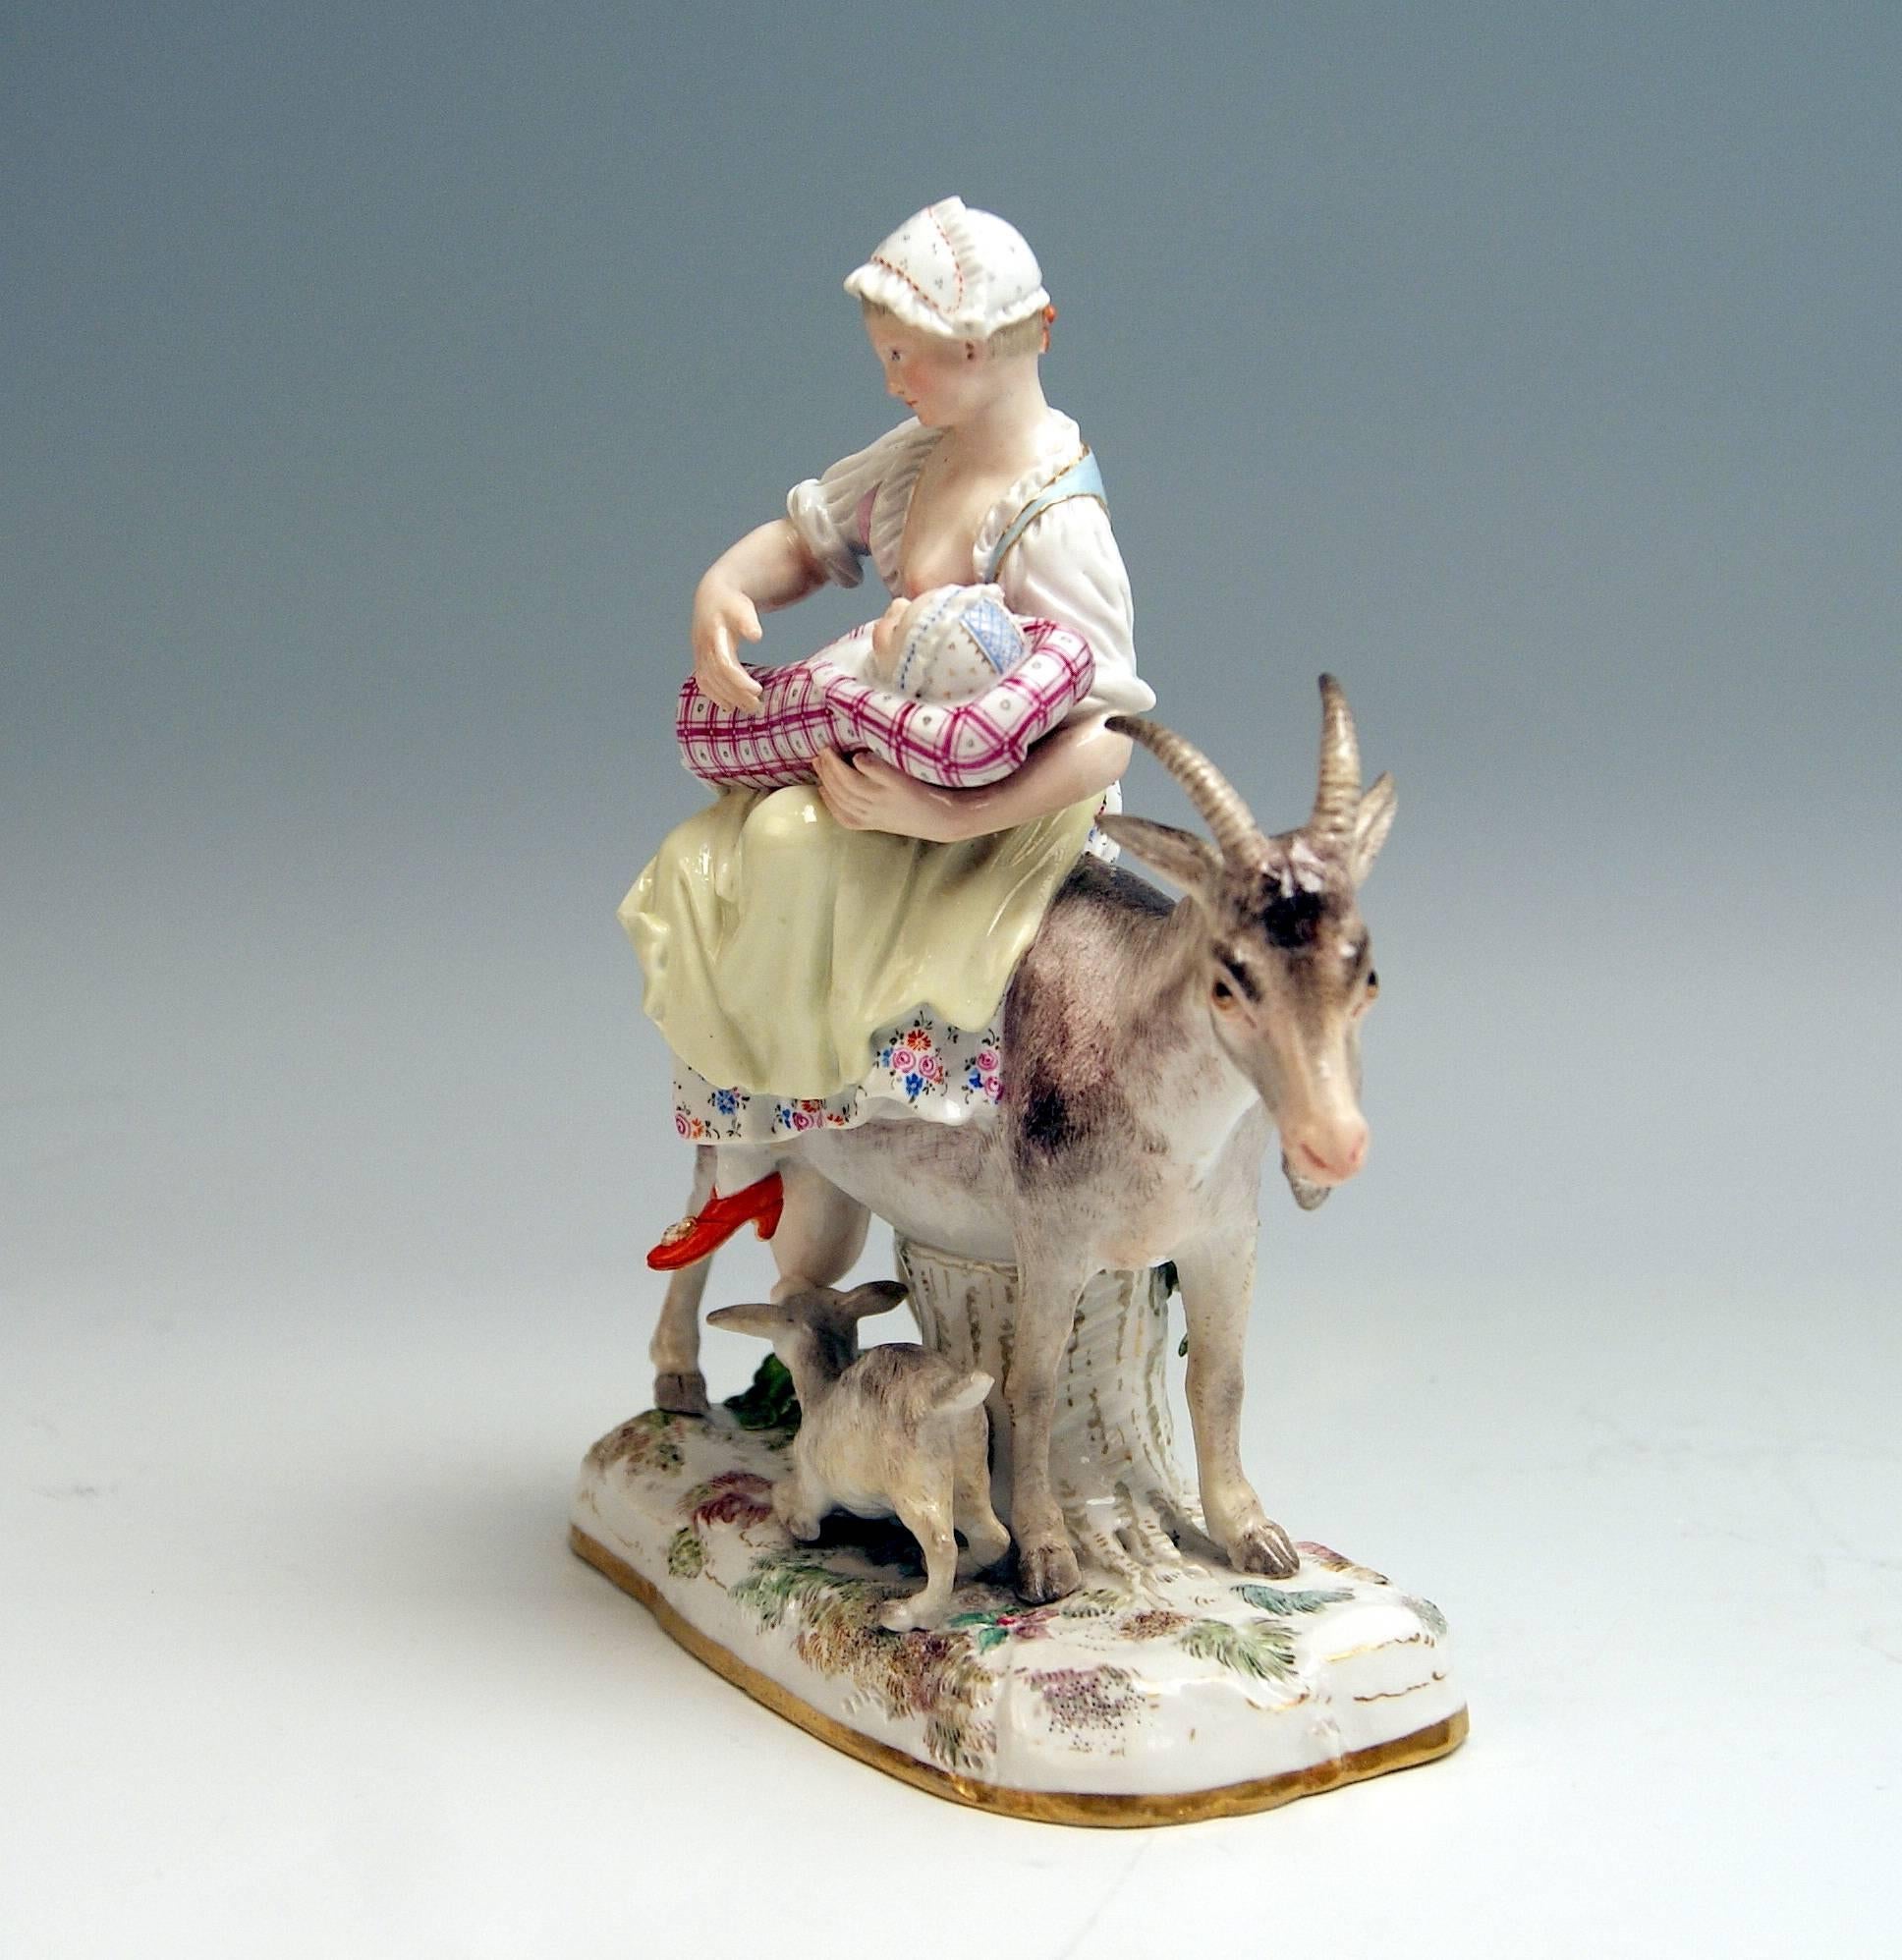 Meissen most remarkable figurine group: wife of tailor riding on goat

Measures / dimensions:
Height: 7.28 inches / 18.5 cm 
Width: 6.49 inches / 16.5 cm
Depth: 2.75 inches / 7.0 cm

Manufactory: Meissen
Hallmarked: Blue Meissen Sword Mark